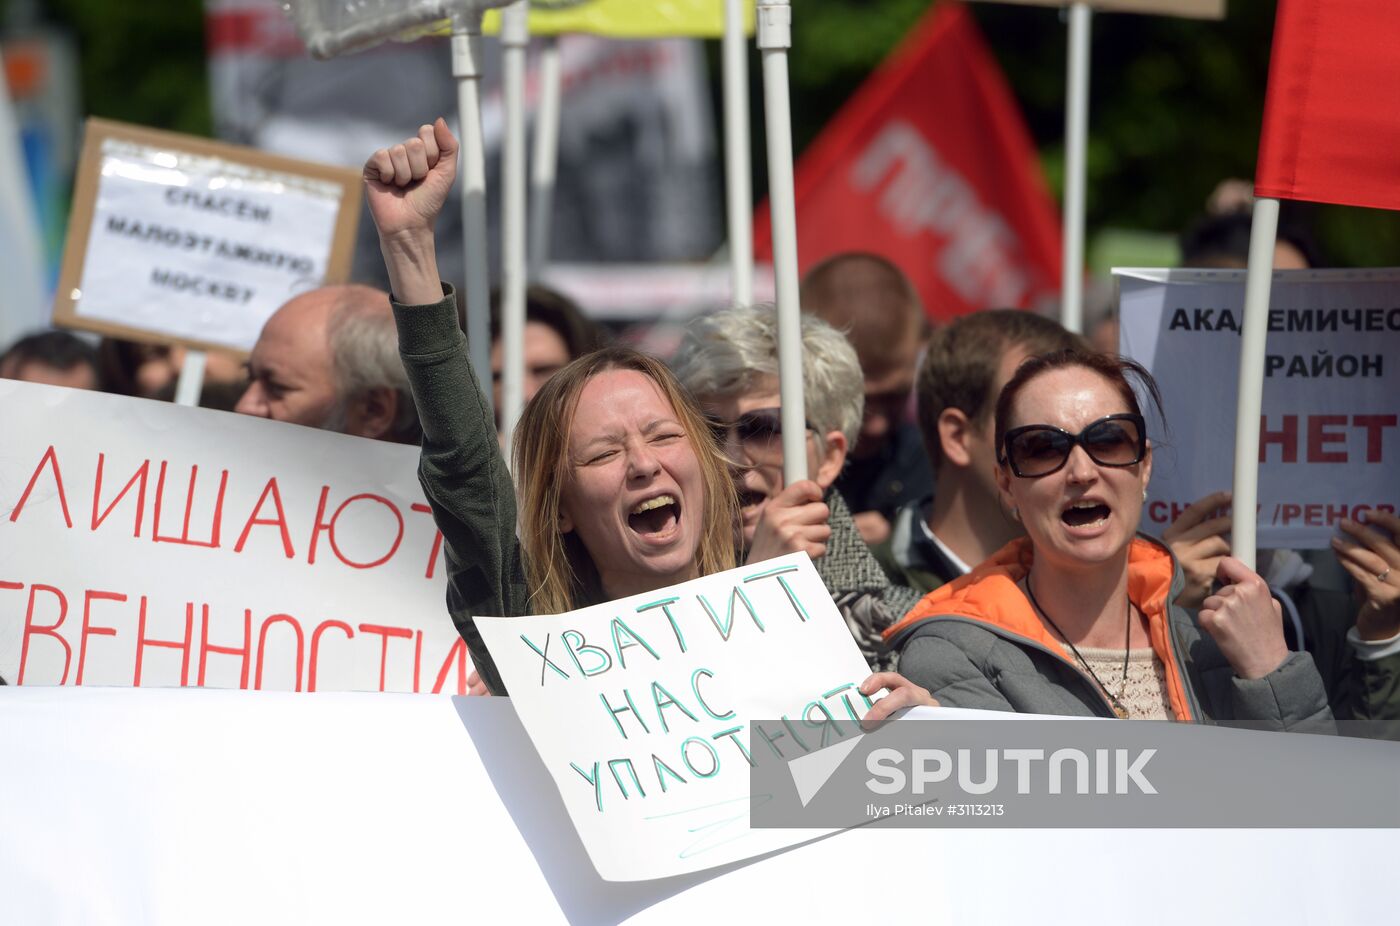 March against Moscow relocation programme